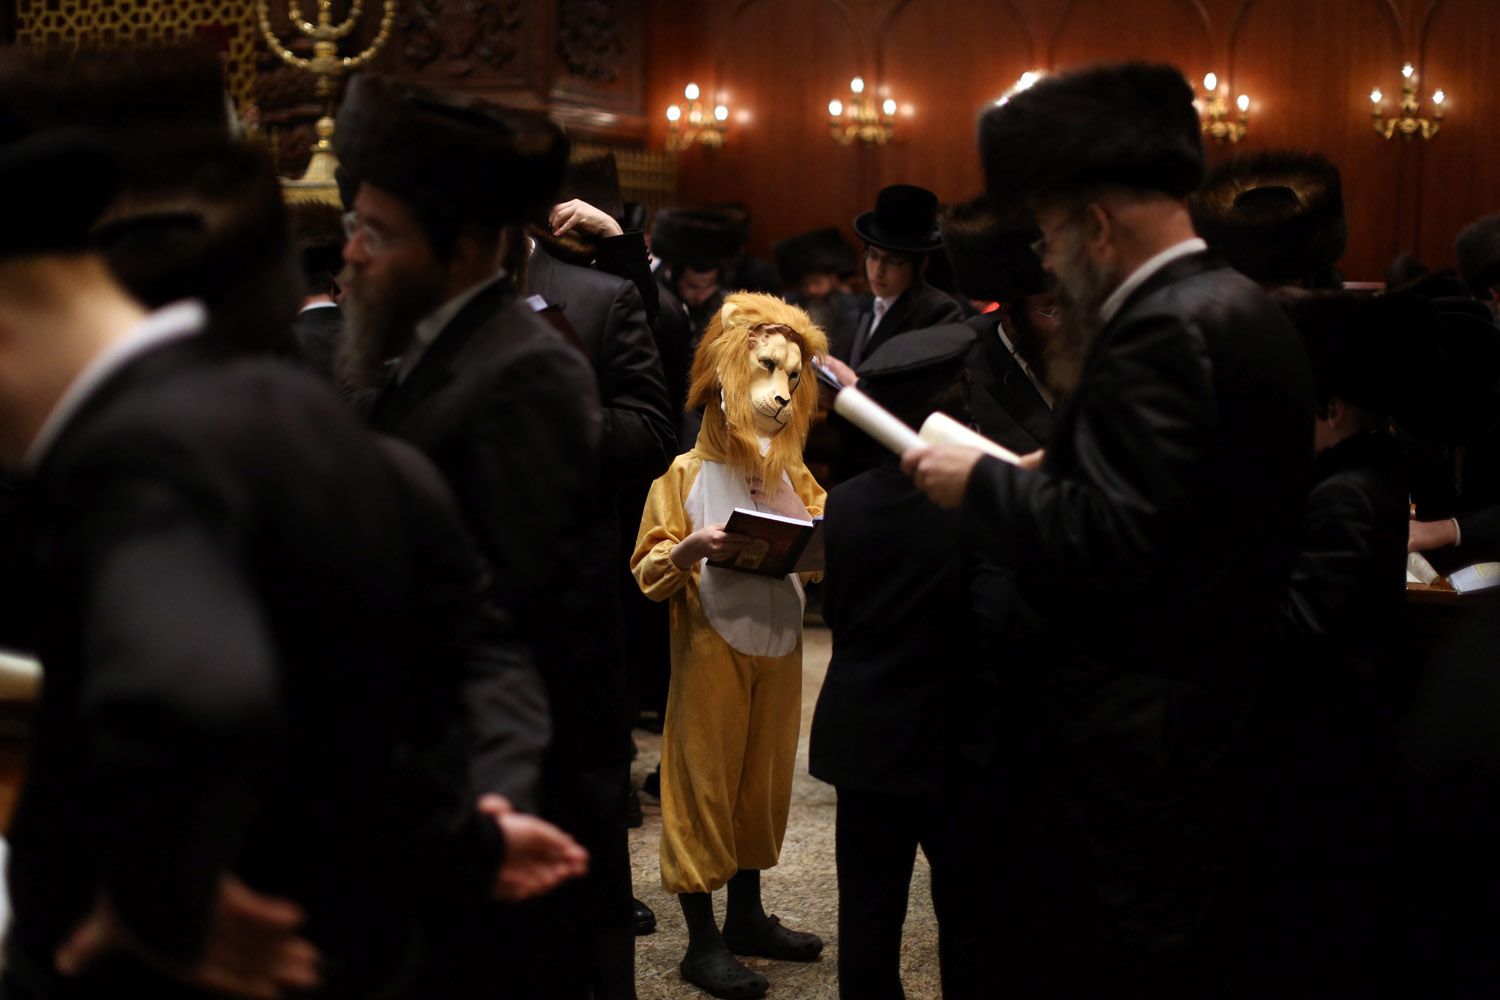 Feb. 24, 2013. Ultra-Orthodox Jewish men and a boy in a lion's costume read from the Scroll of Esther during the Purim festival at a synagogue in the neighborhood of Mea Shaarim in Jerusalem, Israel.